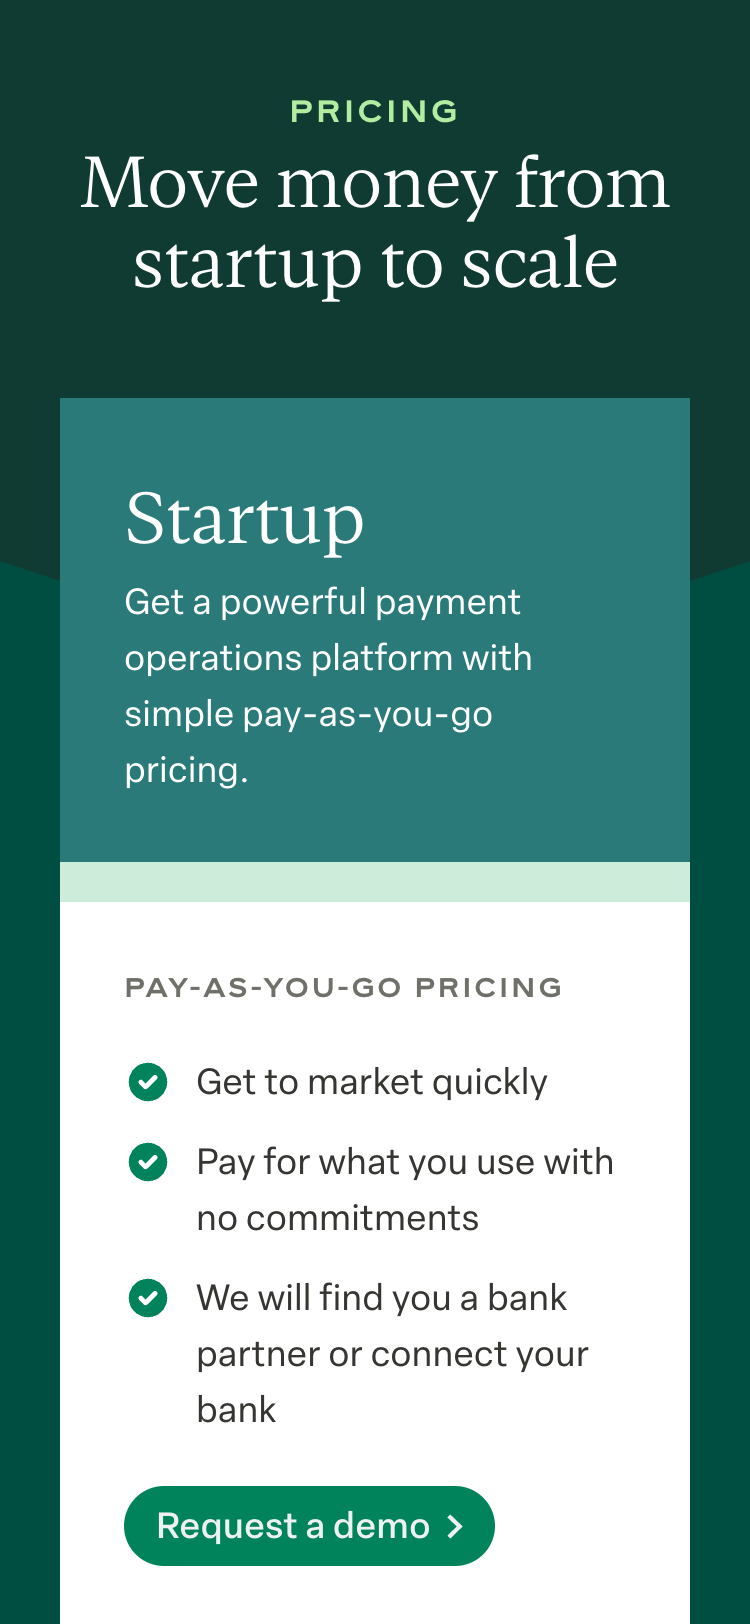 Mobile screenshot of the Modern Treasury 'Pricing' page. The 'Startup' plan can be seen and its features are listed with check marks beside them. At the bottom there is a 'Request a demo' button.